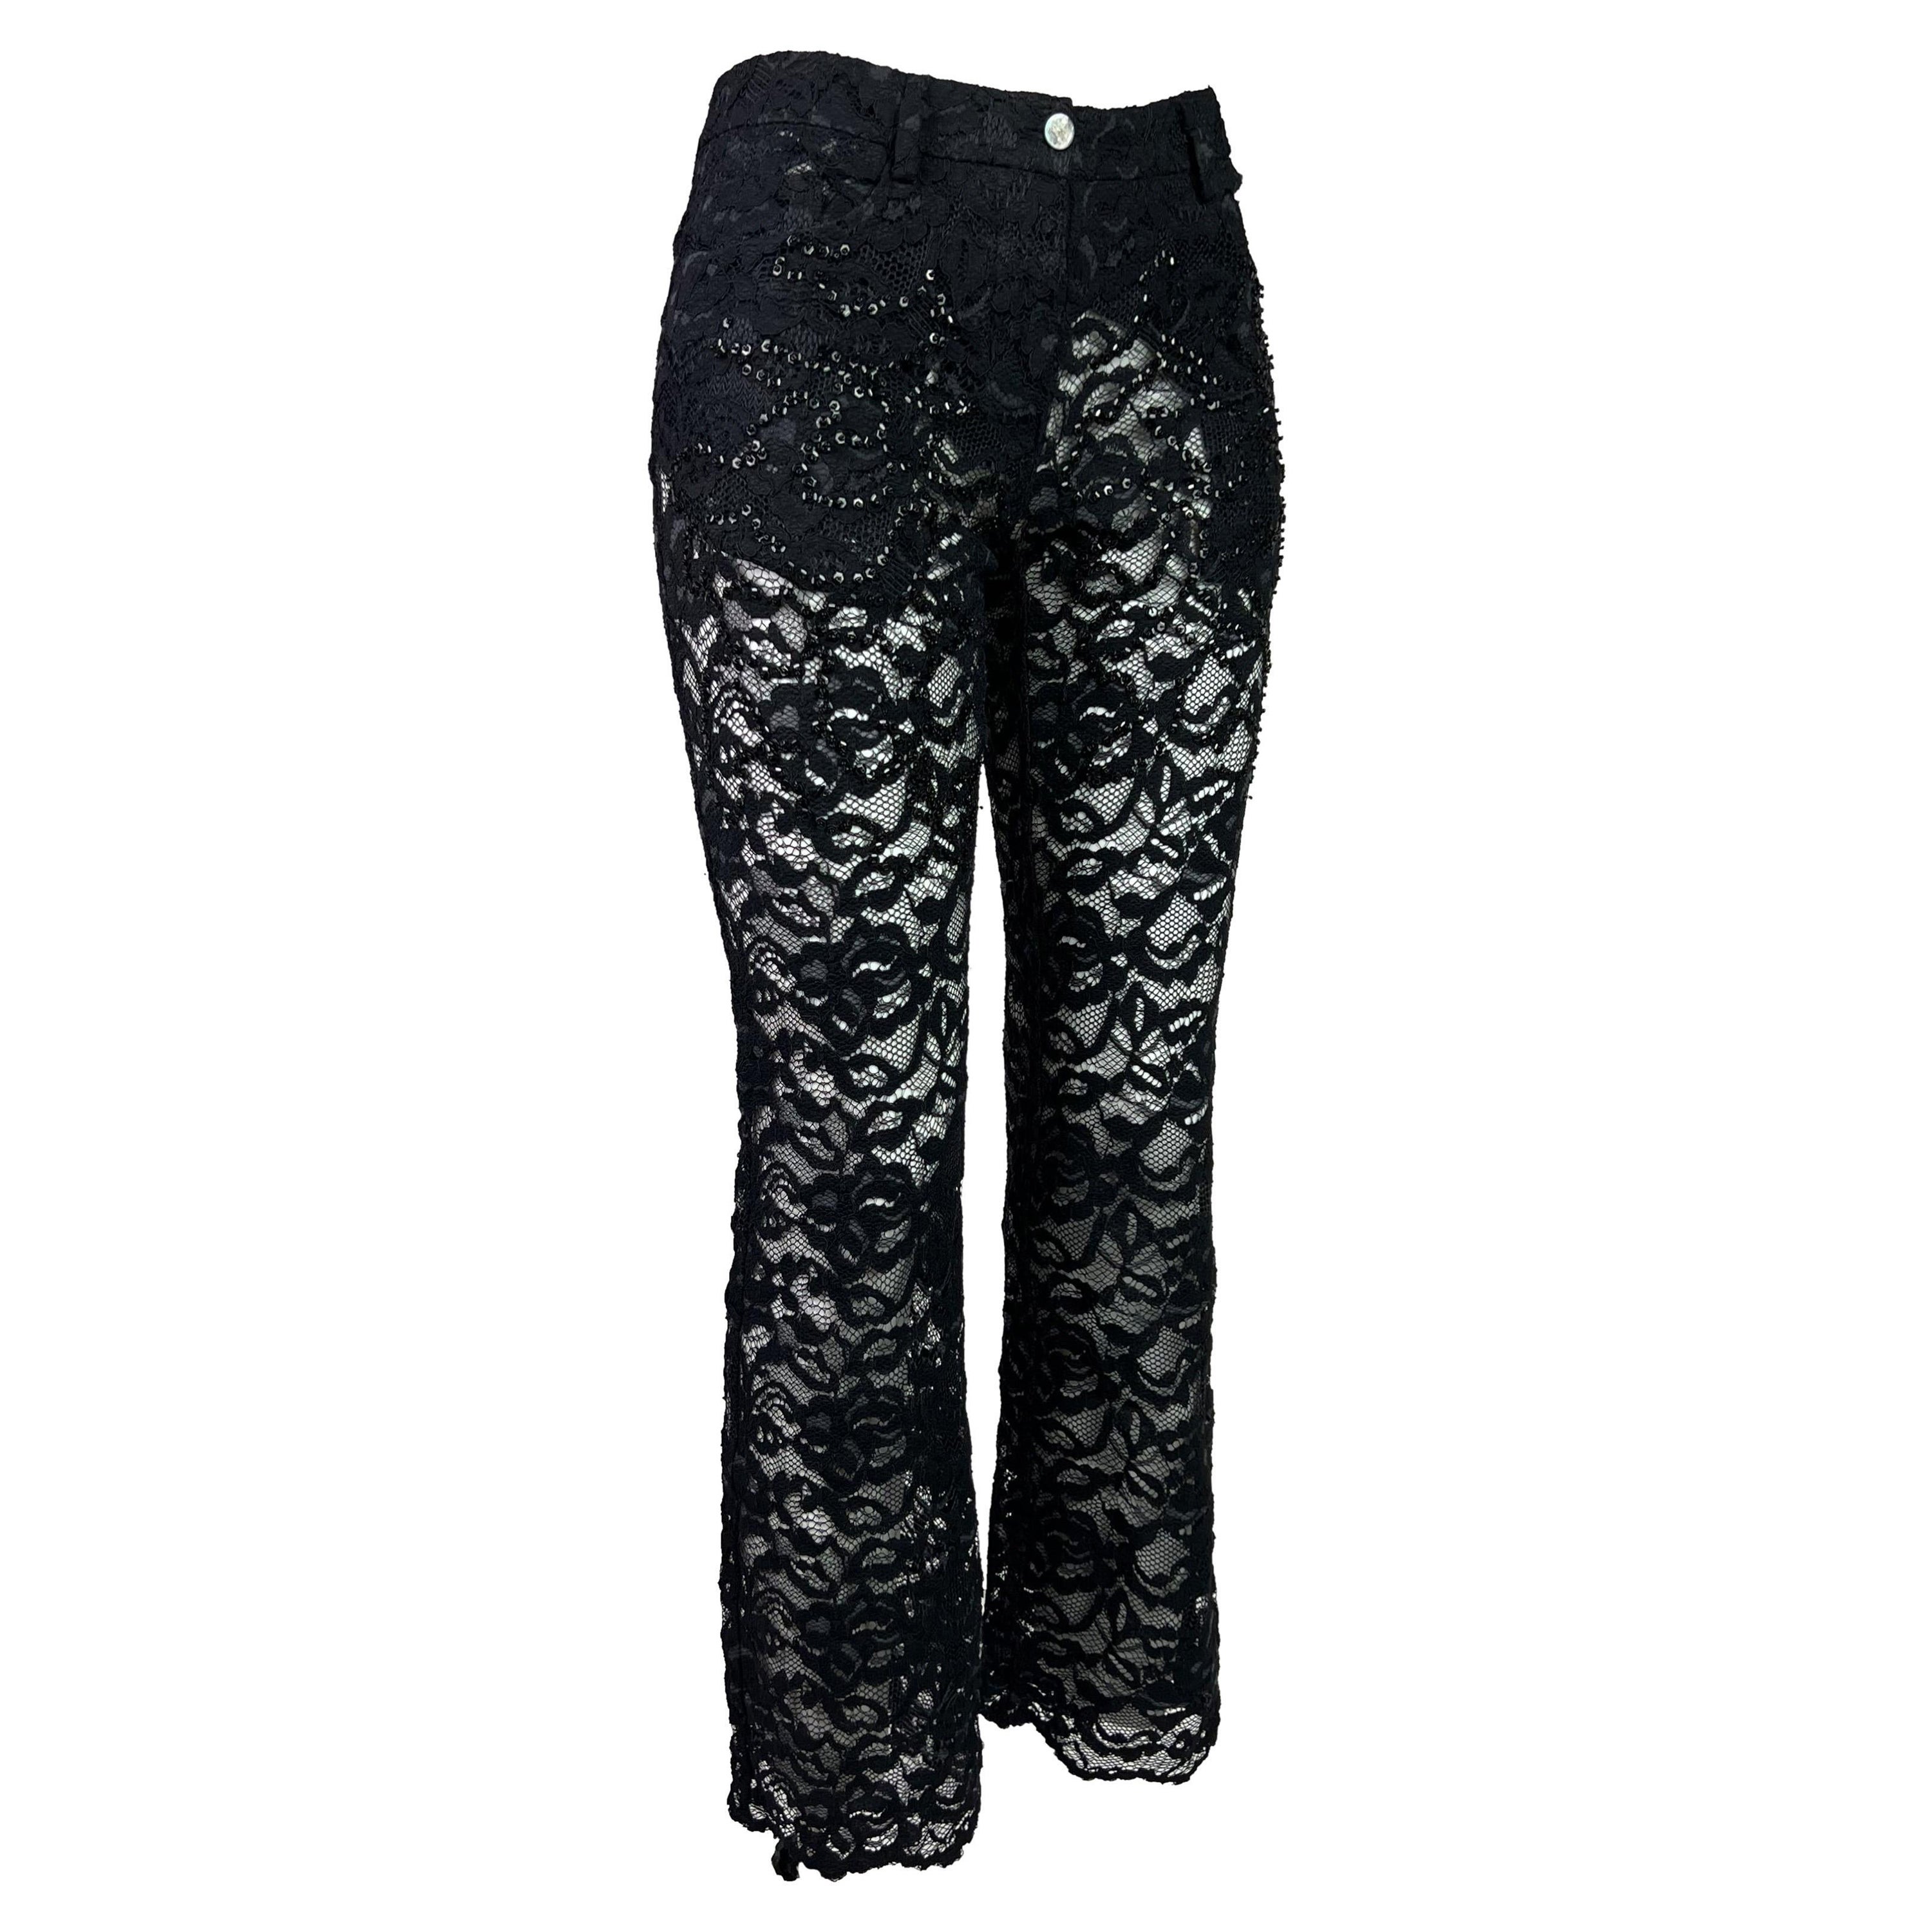 SS 1999 Alexander McQueen Lace Trousers